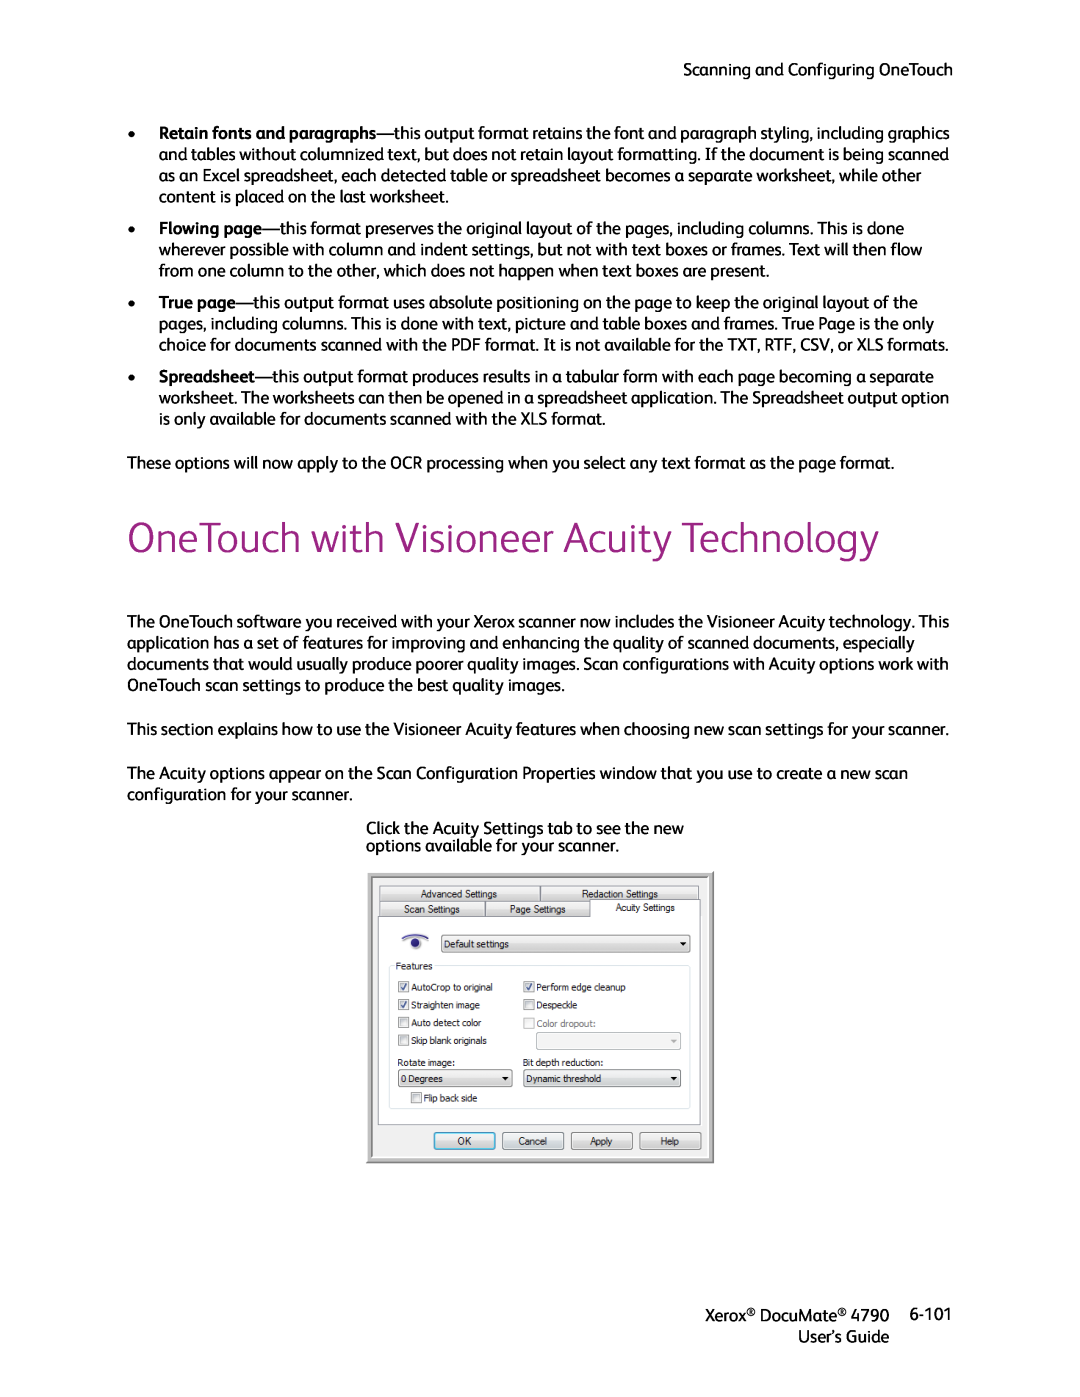 Xerox xerox documate manual OneTouch with Visioneer Acuity Technology 